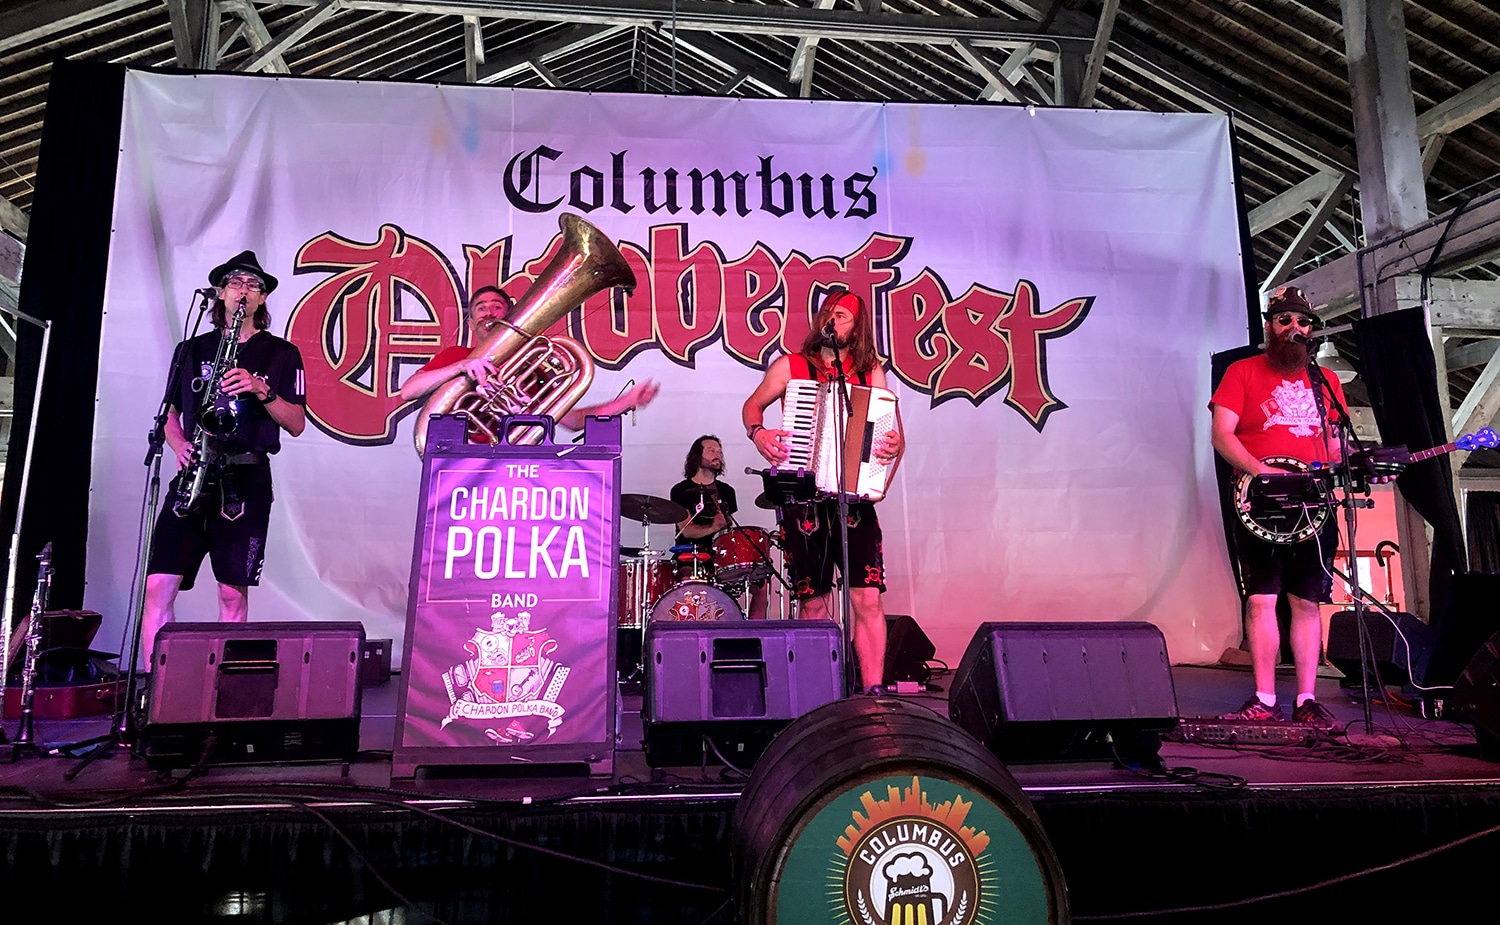 horizontal photo of the Chardon Polka Band on stage at the Columbus Oktoberfest with a large flag backdrop with Columbus Oktoberfest on it. Image: Wikimedia Commons https://commons.wikimedia.org/wiki/File:Chardon_Polka_Band_-_Columbus_Oktoberfest.jpg